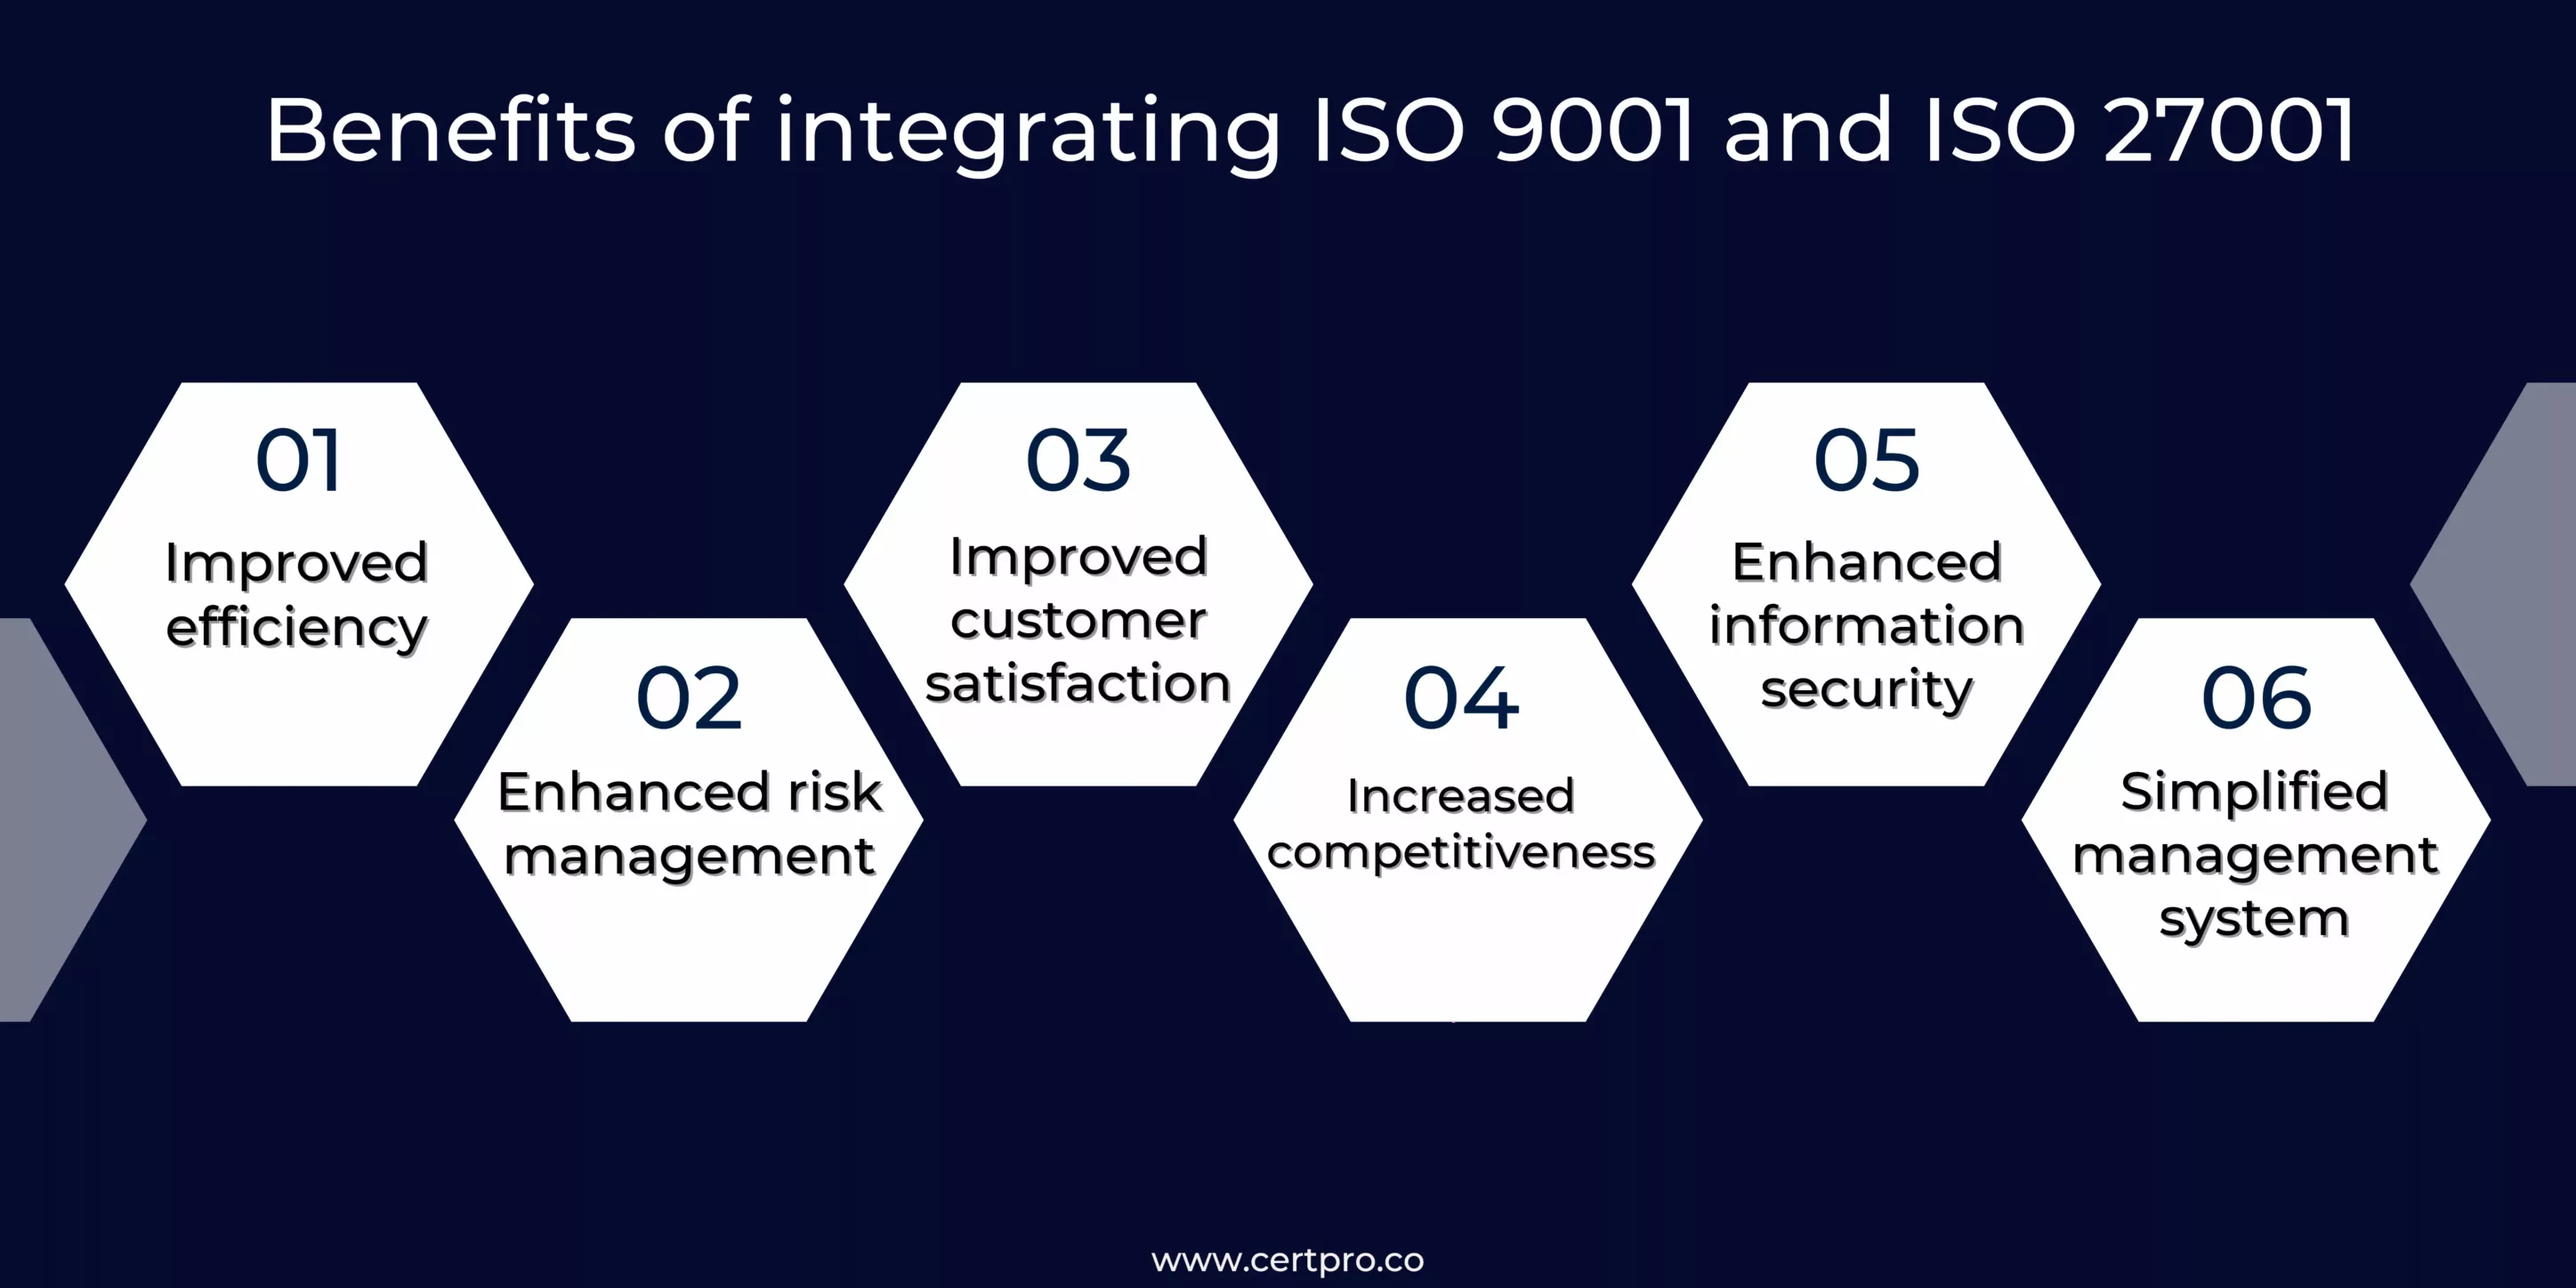 benefit of integrating ISO 9001 and ISO 27001